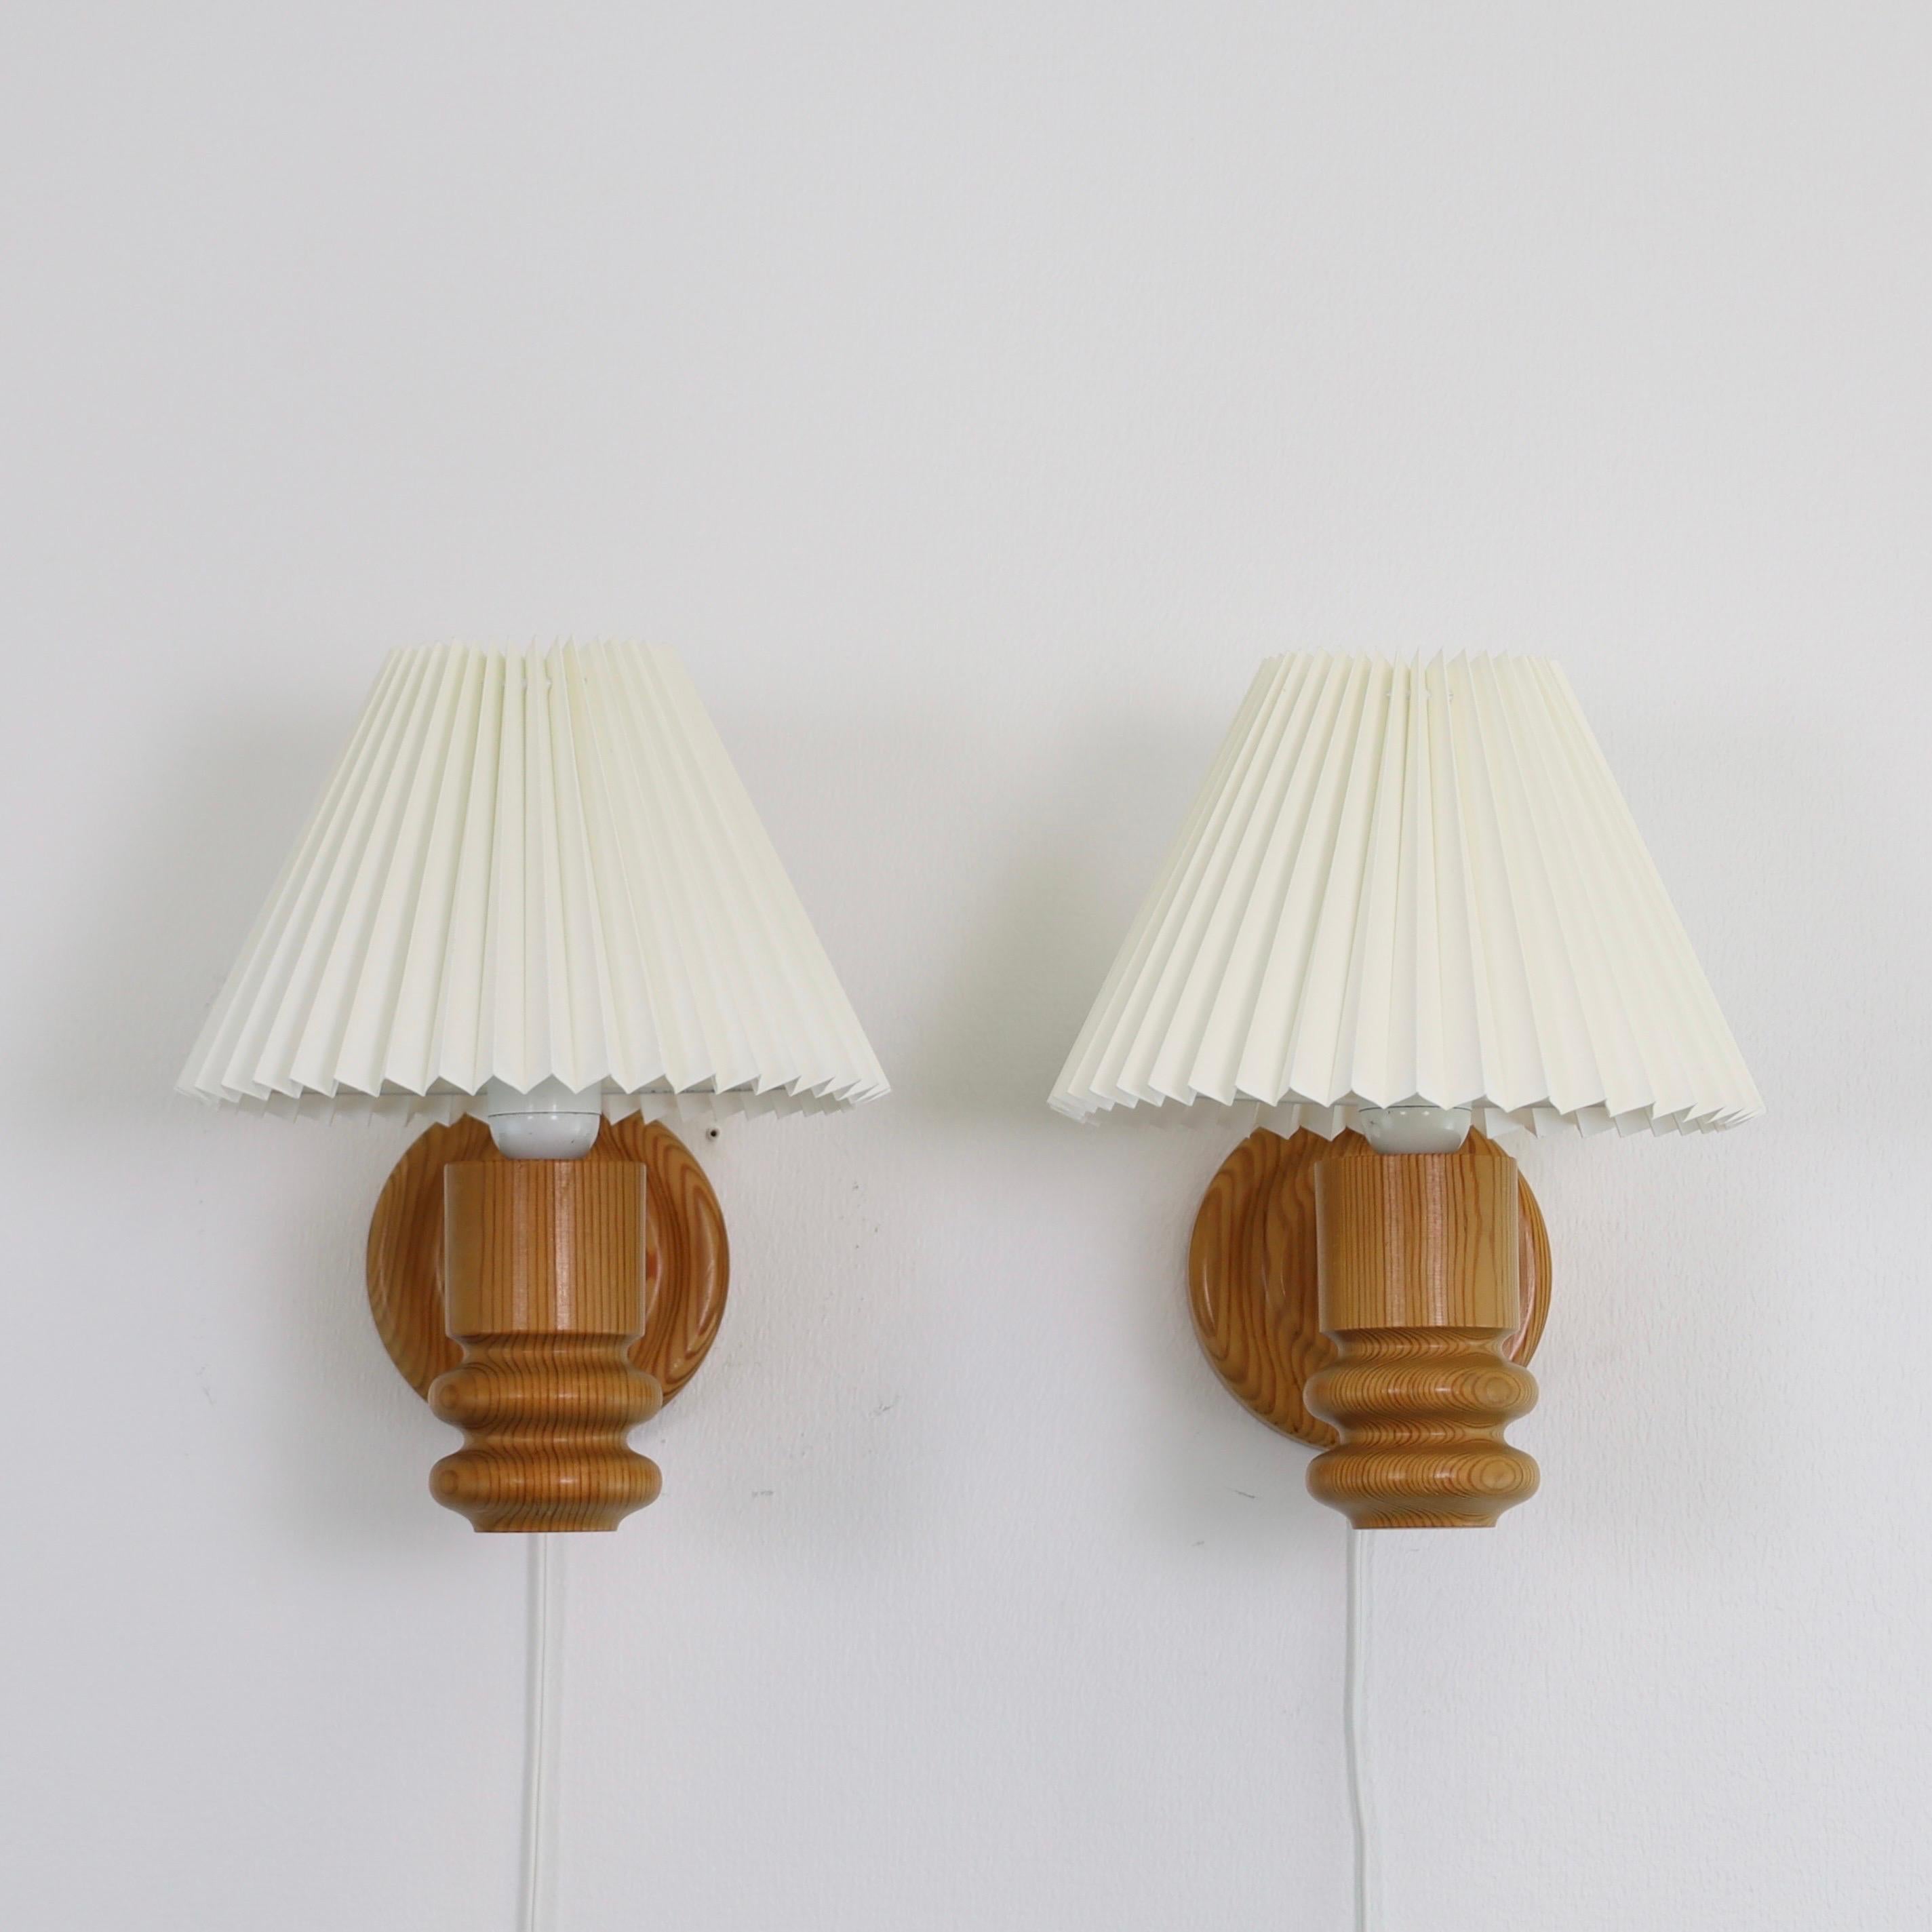 Late 20th Century Set of Swedish Pine Wood Wall Lamps by Solbackens Svarveri, Sweden, 1970s For Sale